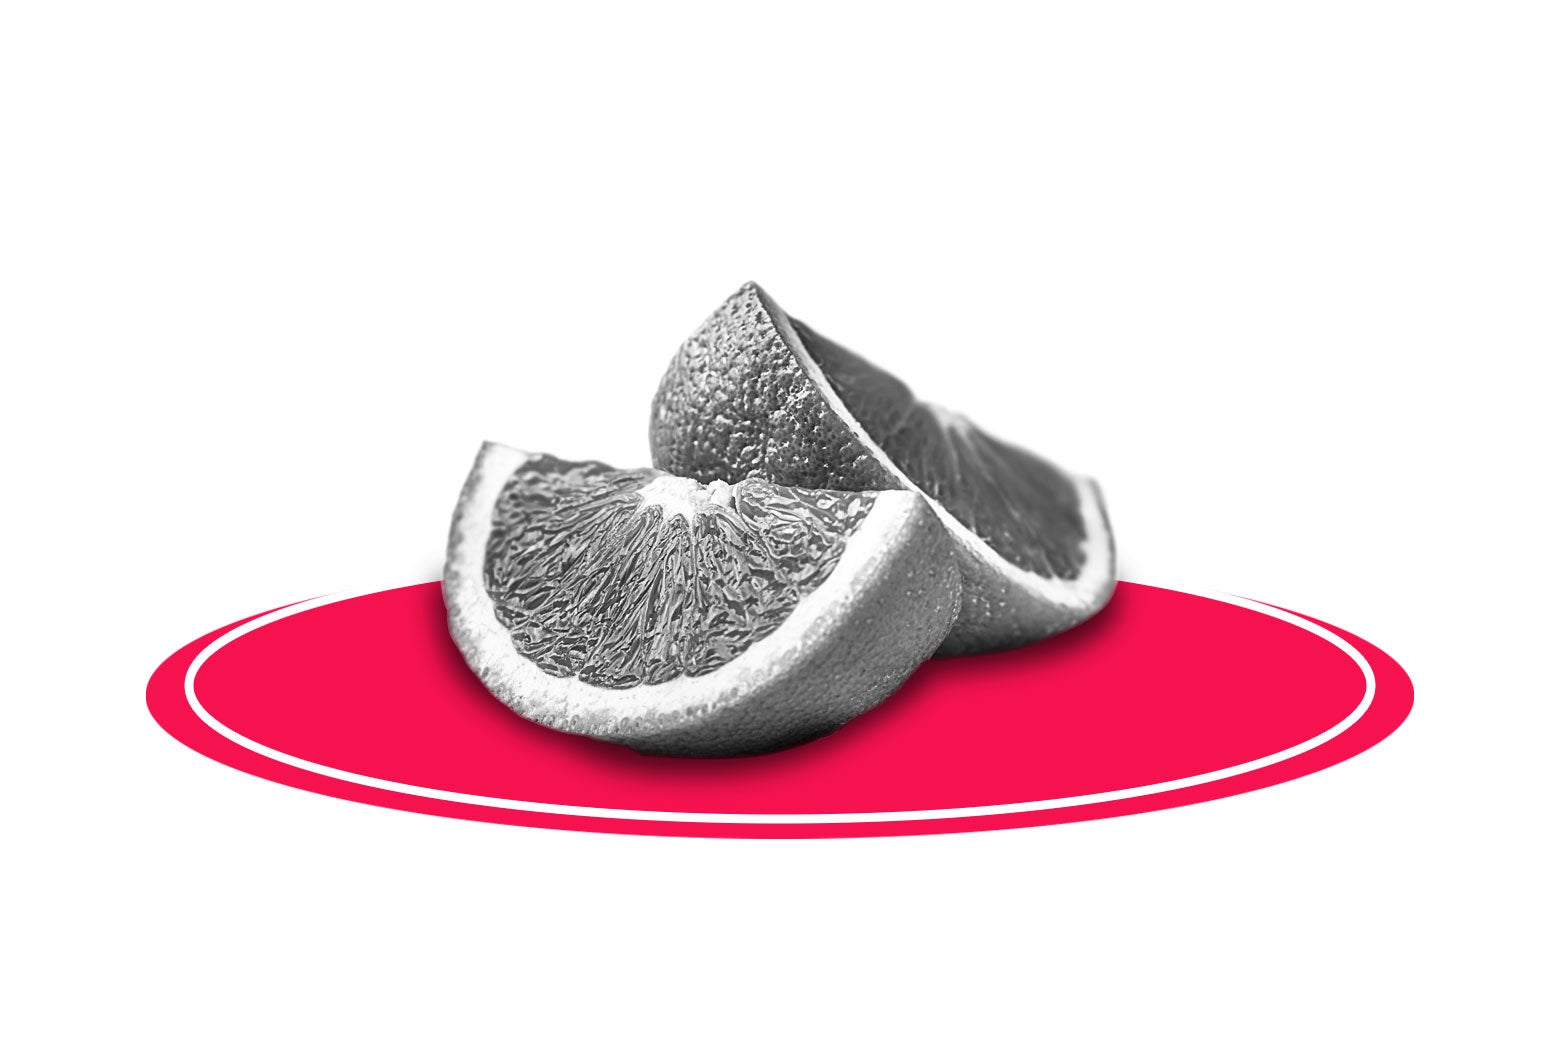 Two slices of orange on an illustrated red plate.